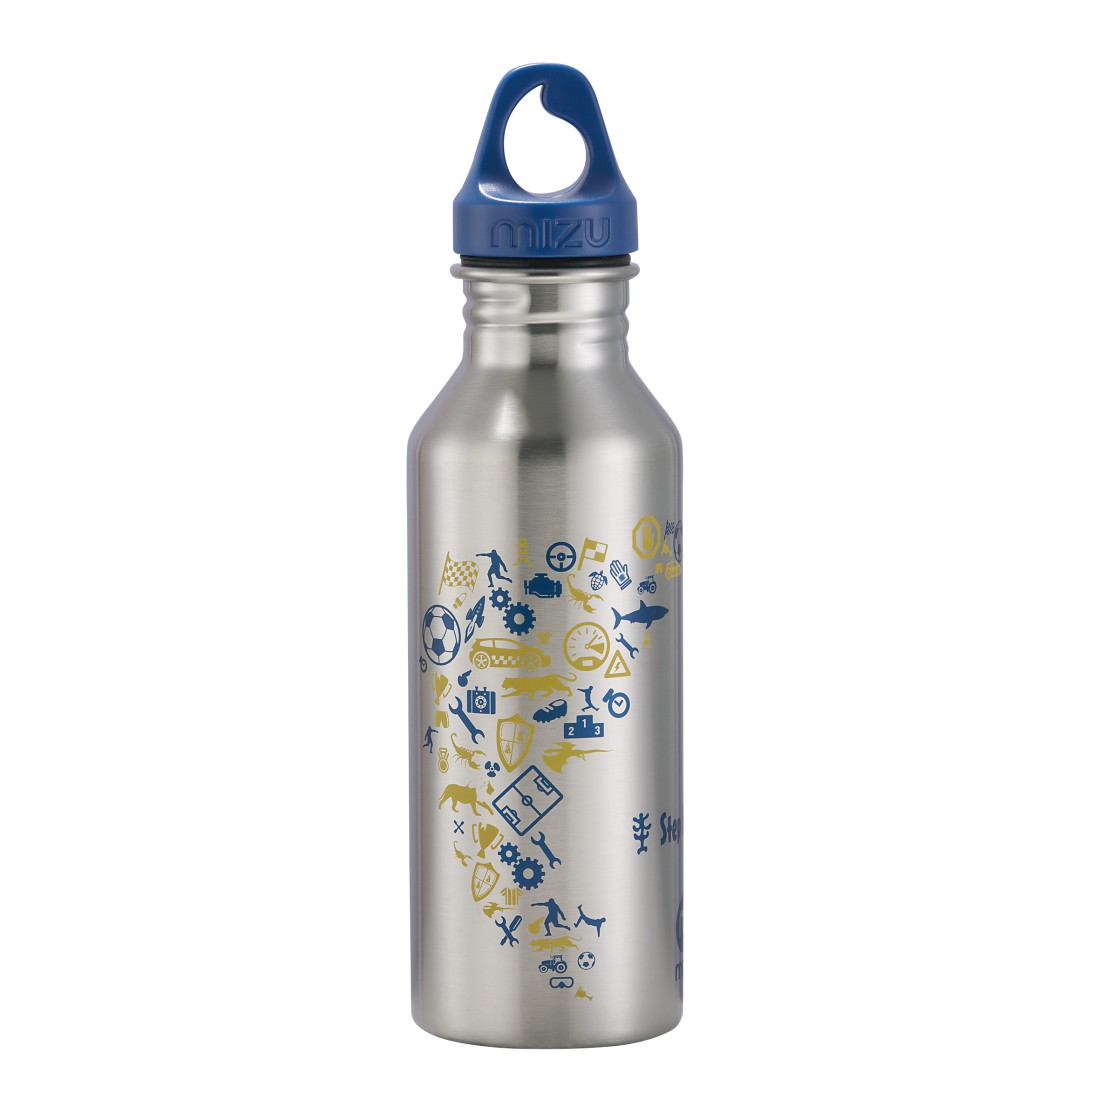 E-shop Hama Stainless Steel Bottle 0,5 l Blue/Yellow